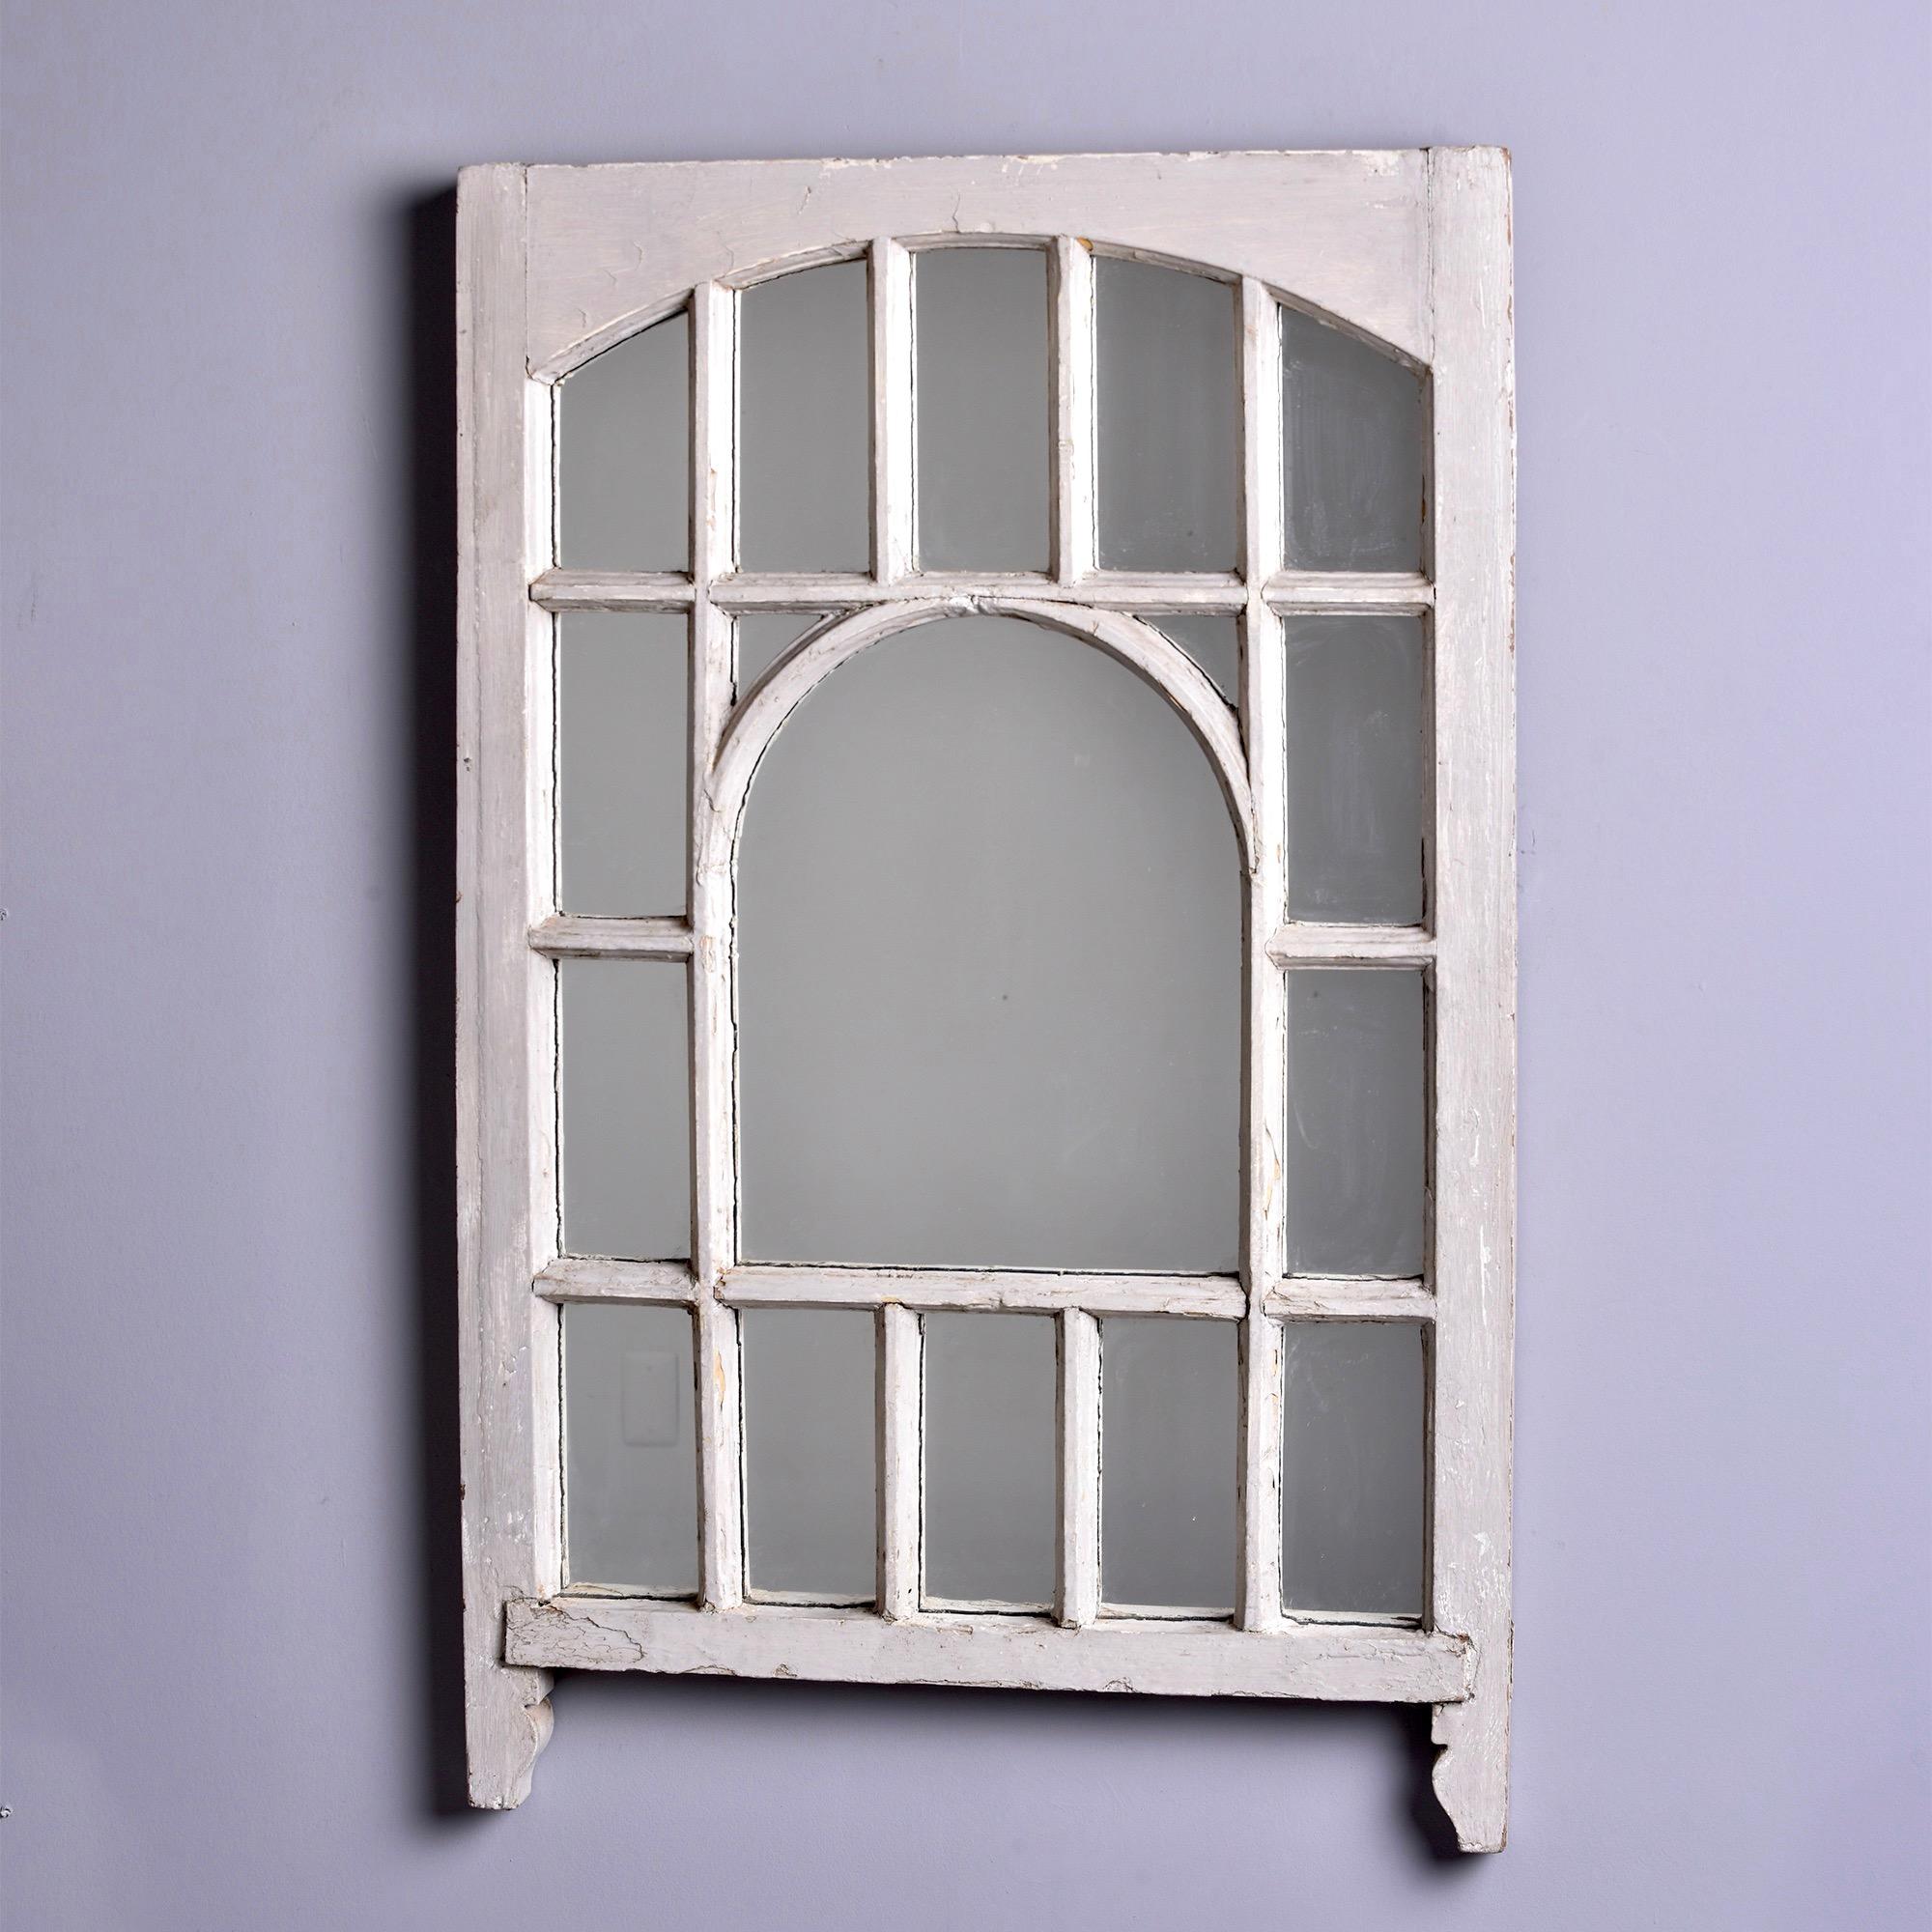 Early 20th C English White Painted Window Frame Mirror For Sale 1